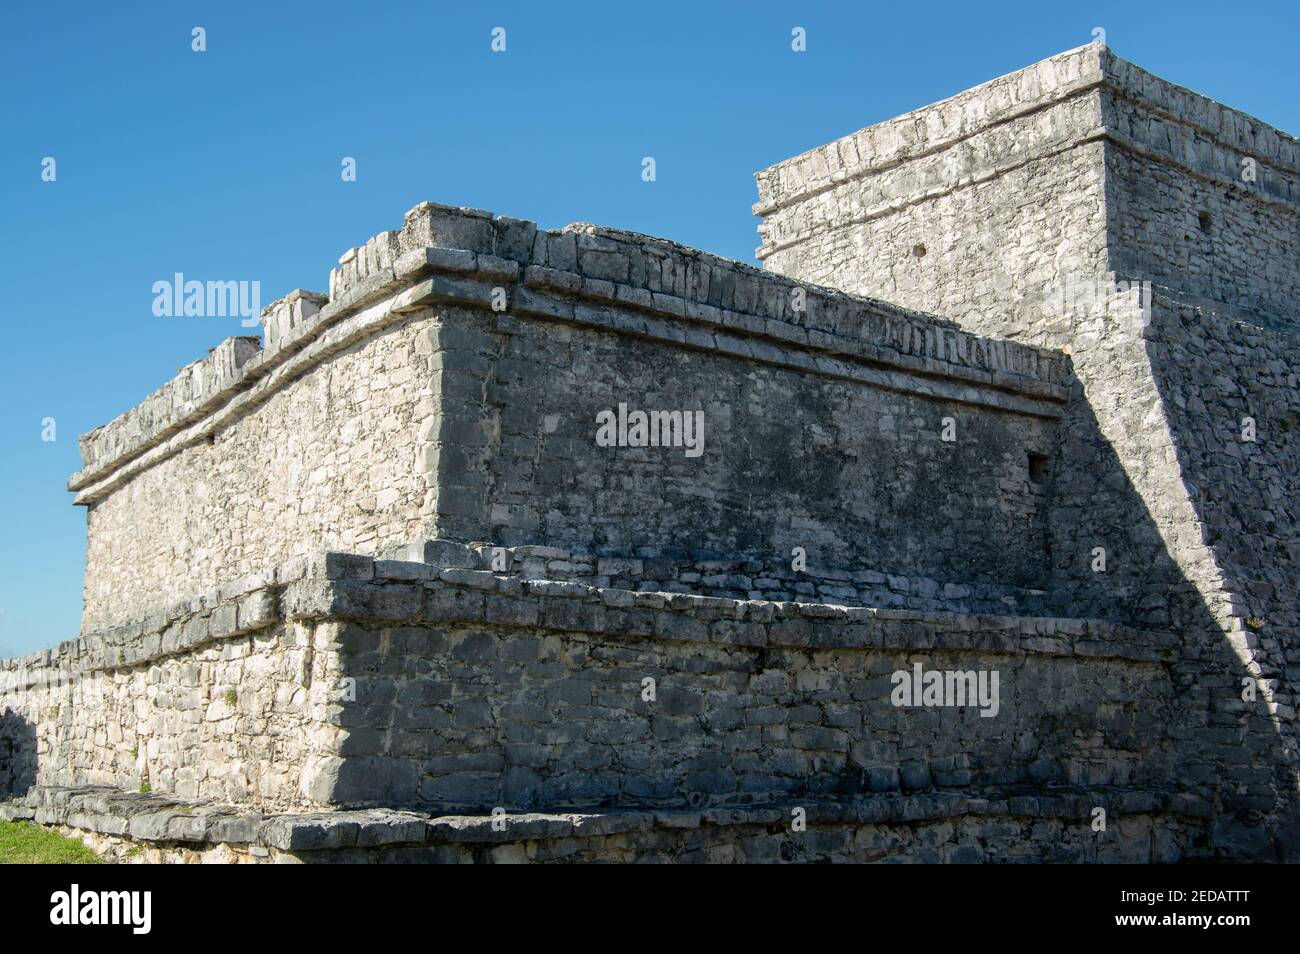 The Mayan ruins of Tulum on the Yucatán peninsula in the state of Quintana Roo, Mexico Stock Photo